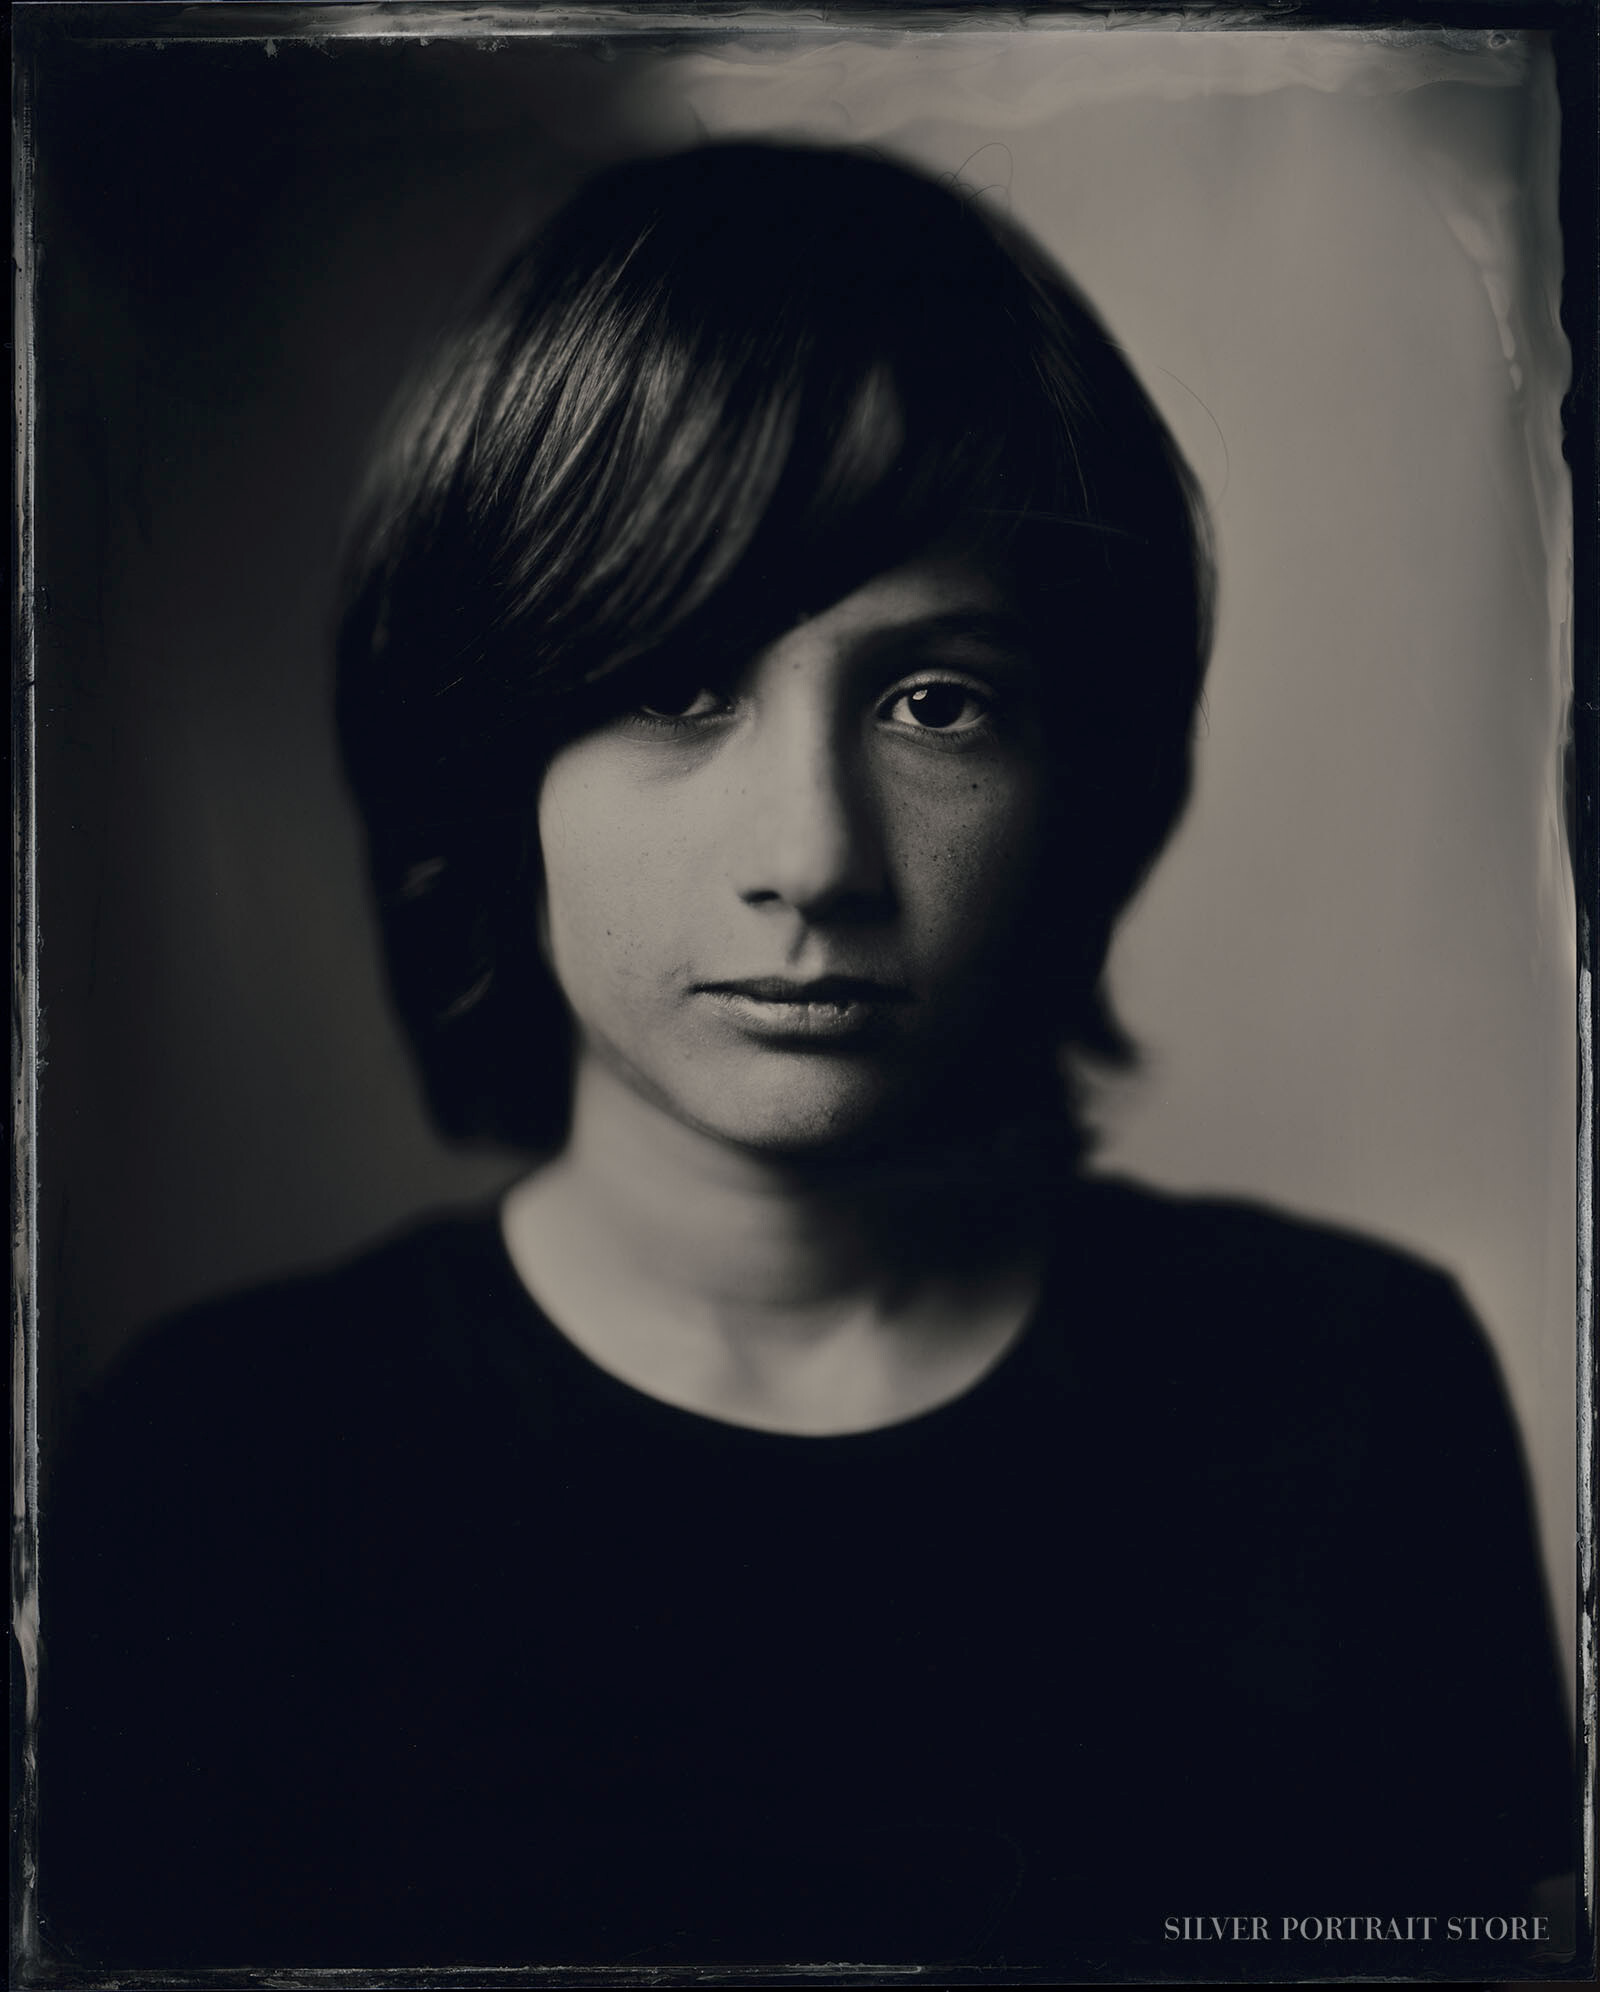 Piet-Silver Portrait Store-Scan from Wet plate collodion-Tintype 20 x 25 cm.